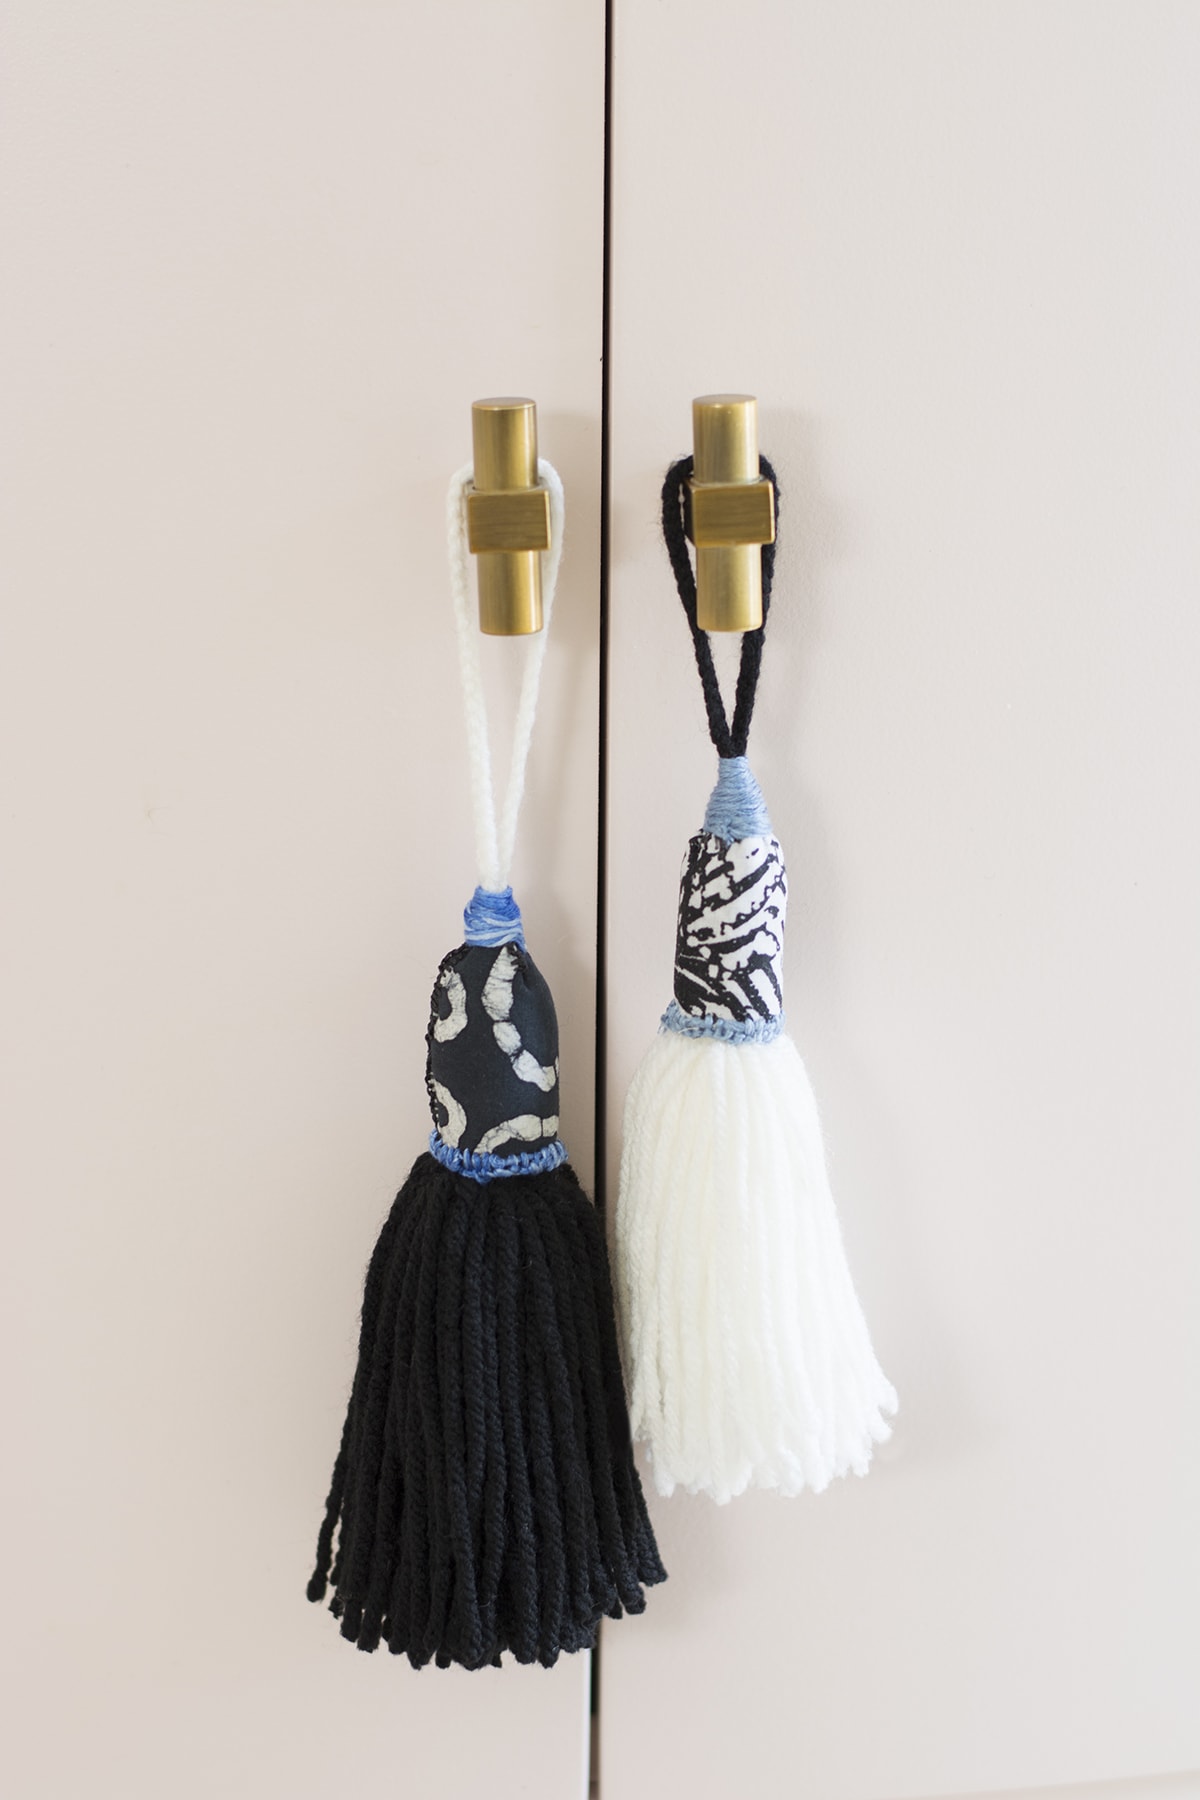 colorful yarn tassels with a unique twist